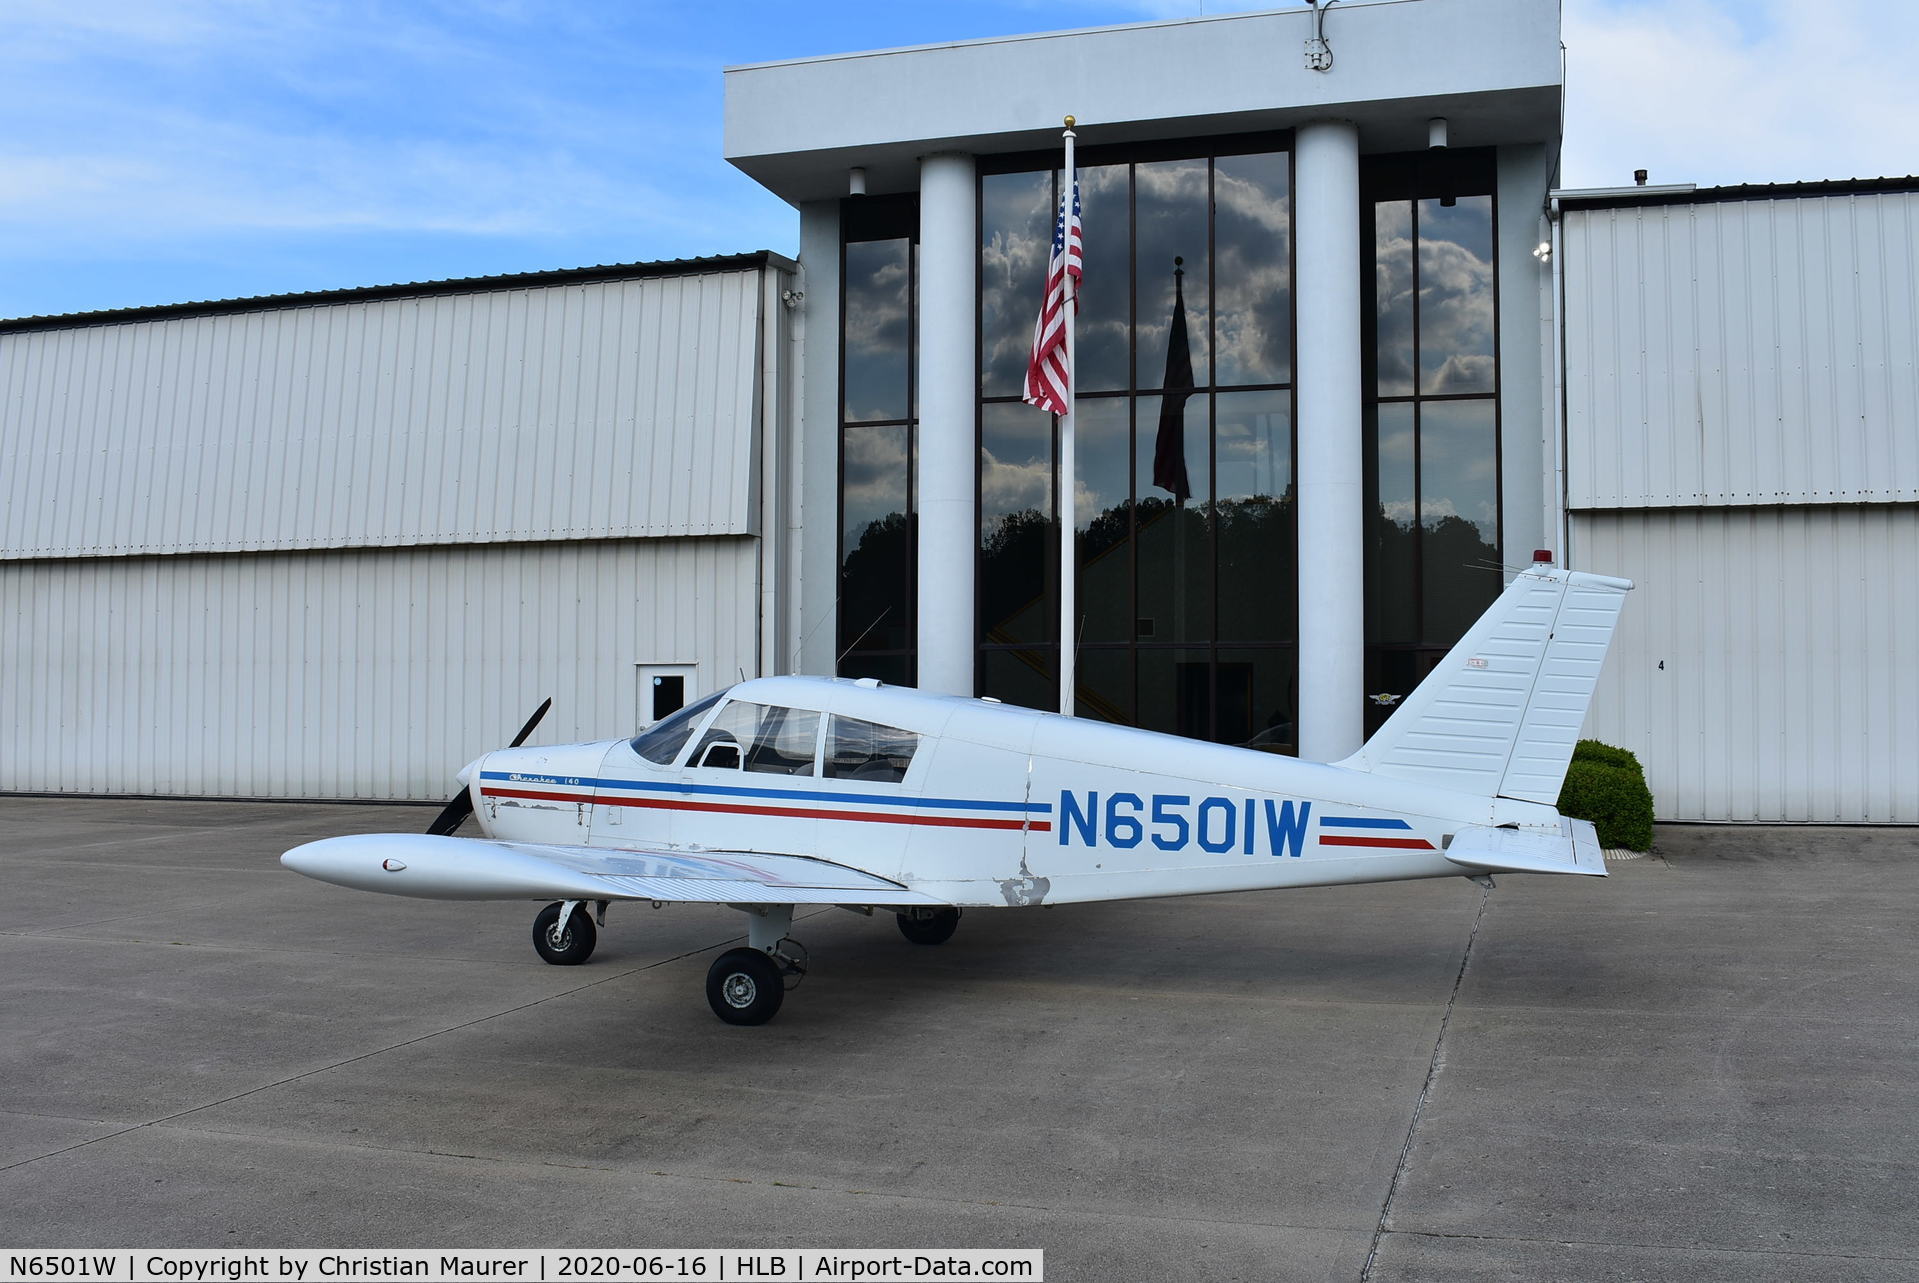 N6501W, 1964 Piper PA-28-140 C/N 28-20578, 01W in front of the American Flag at Batesville